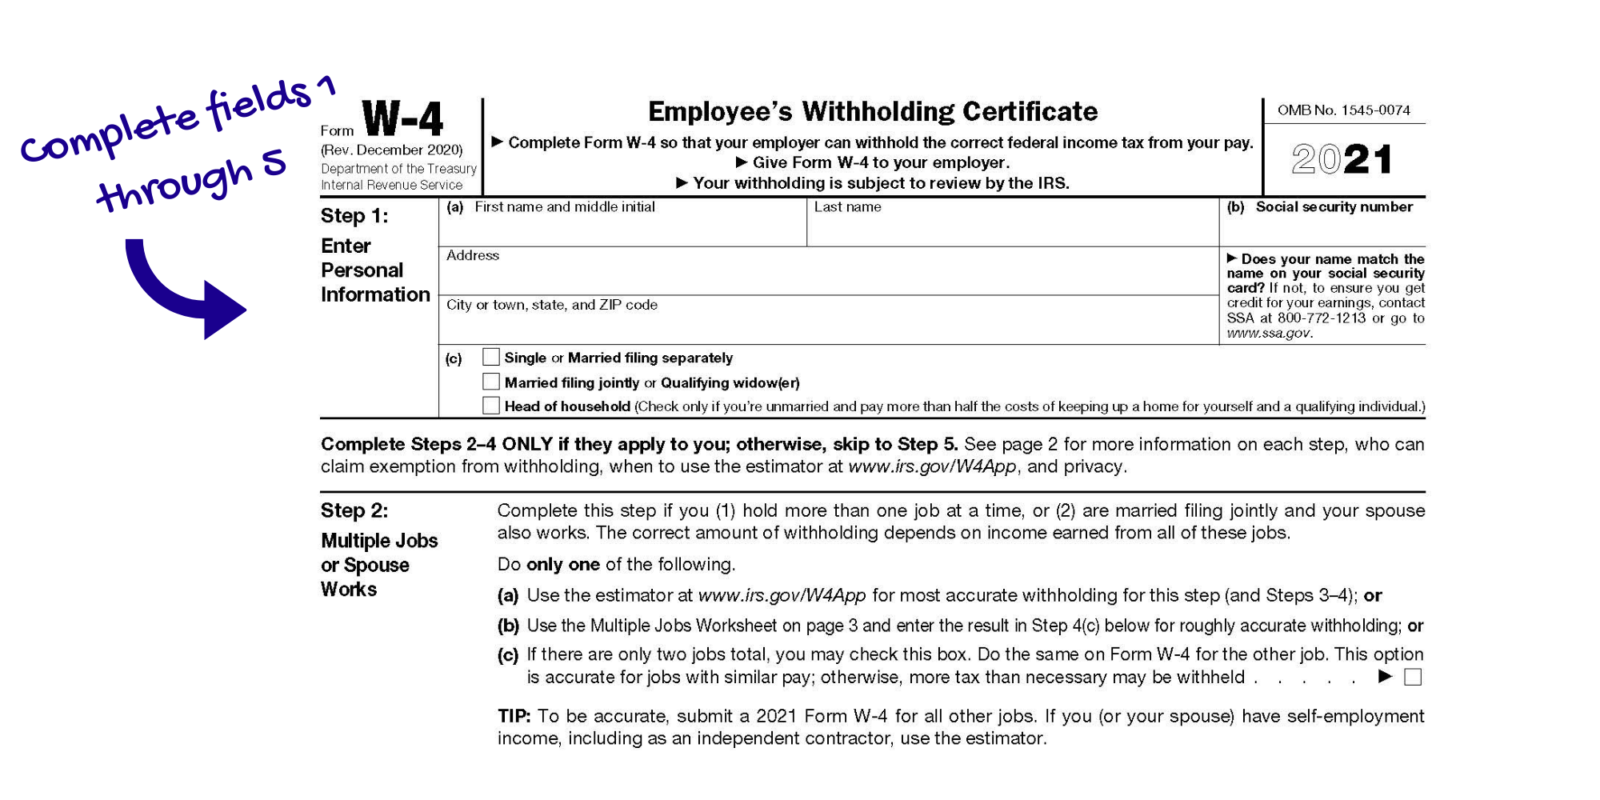 how-to-complete-a-form-w-4-updated-for-2021-canon-capital-management